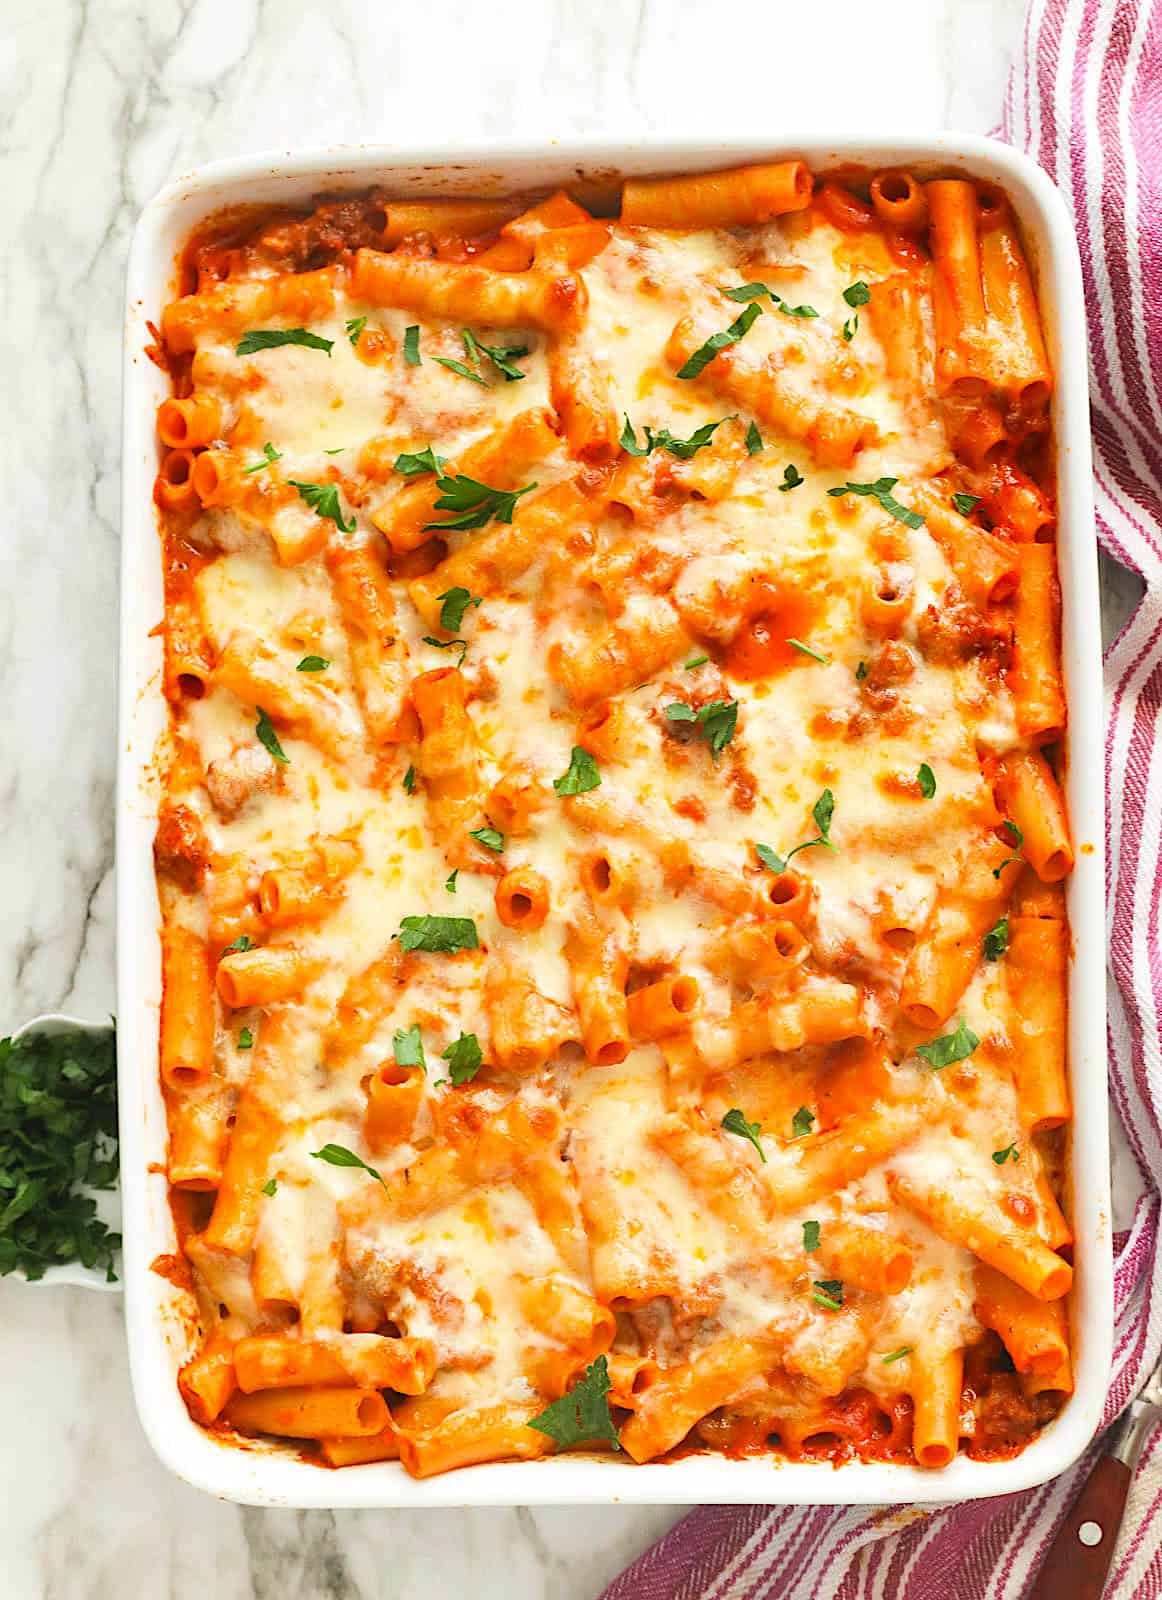 Baked Ziti fresh from the oven